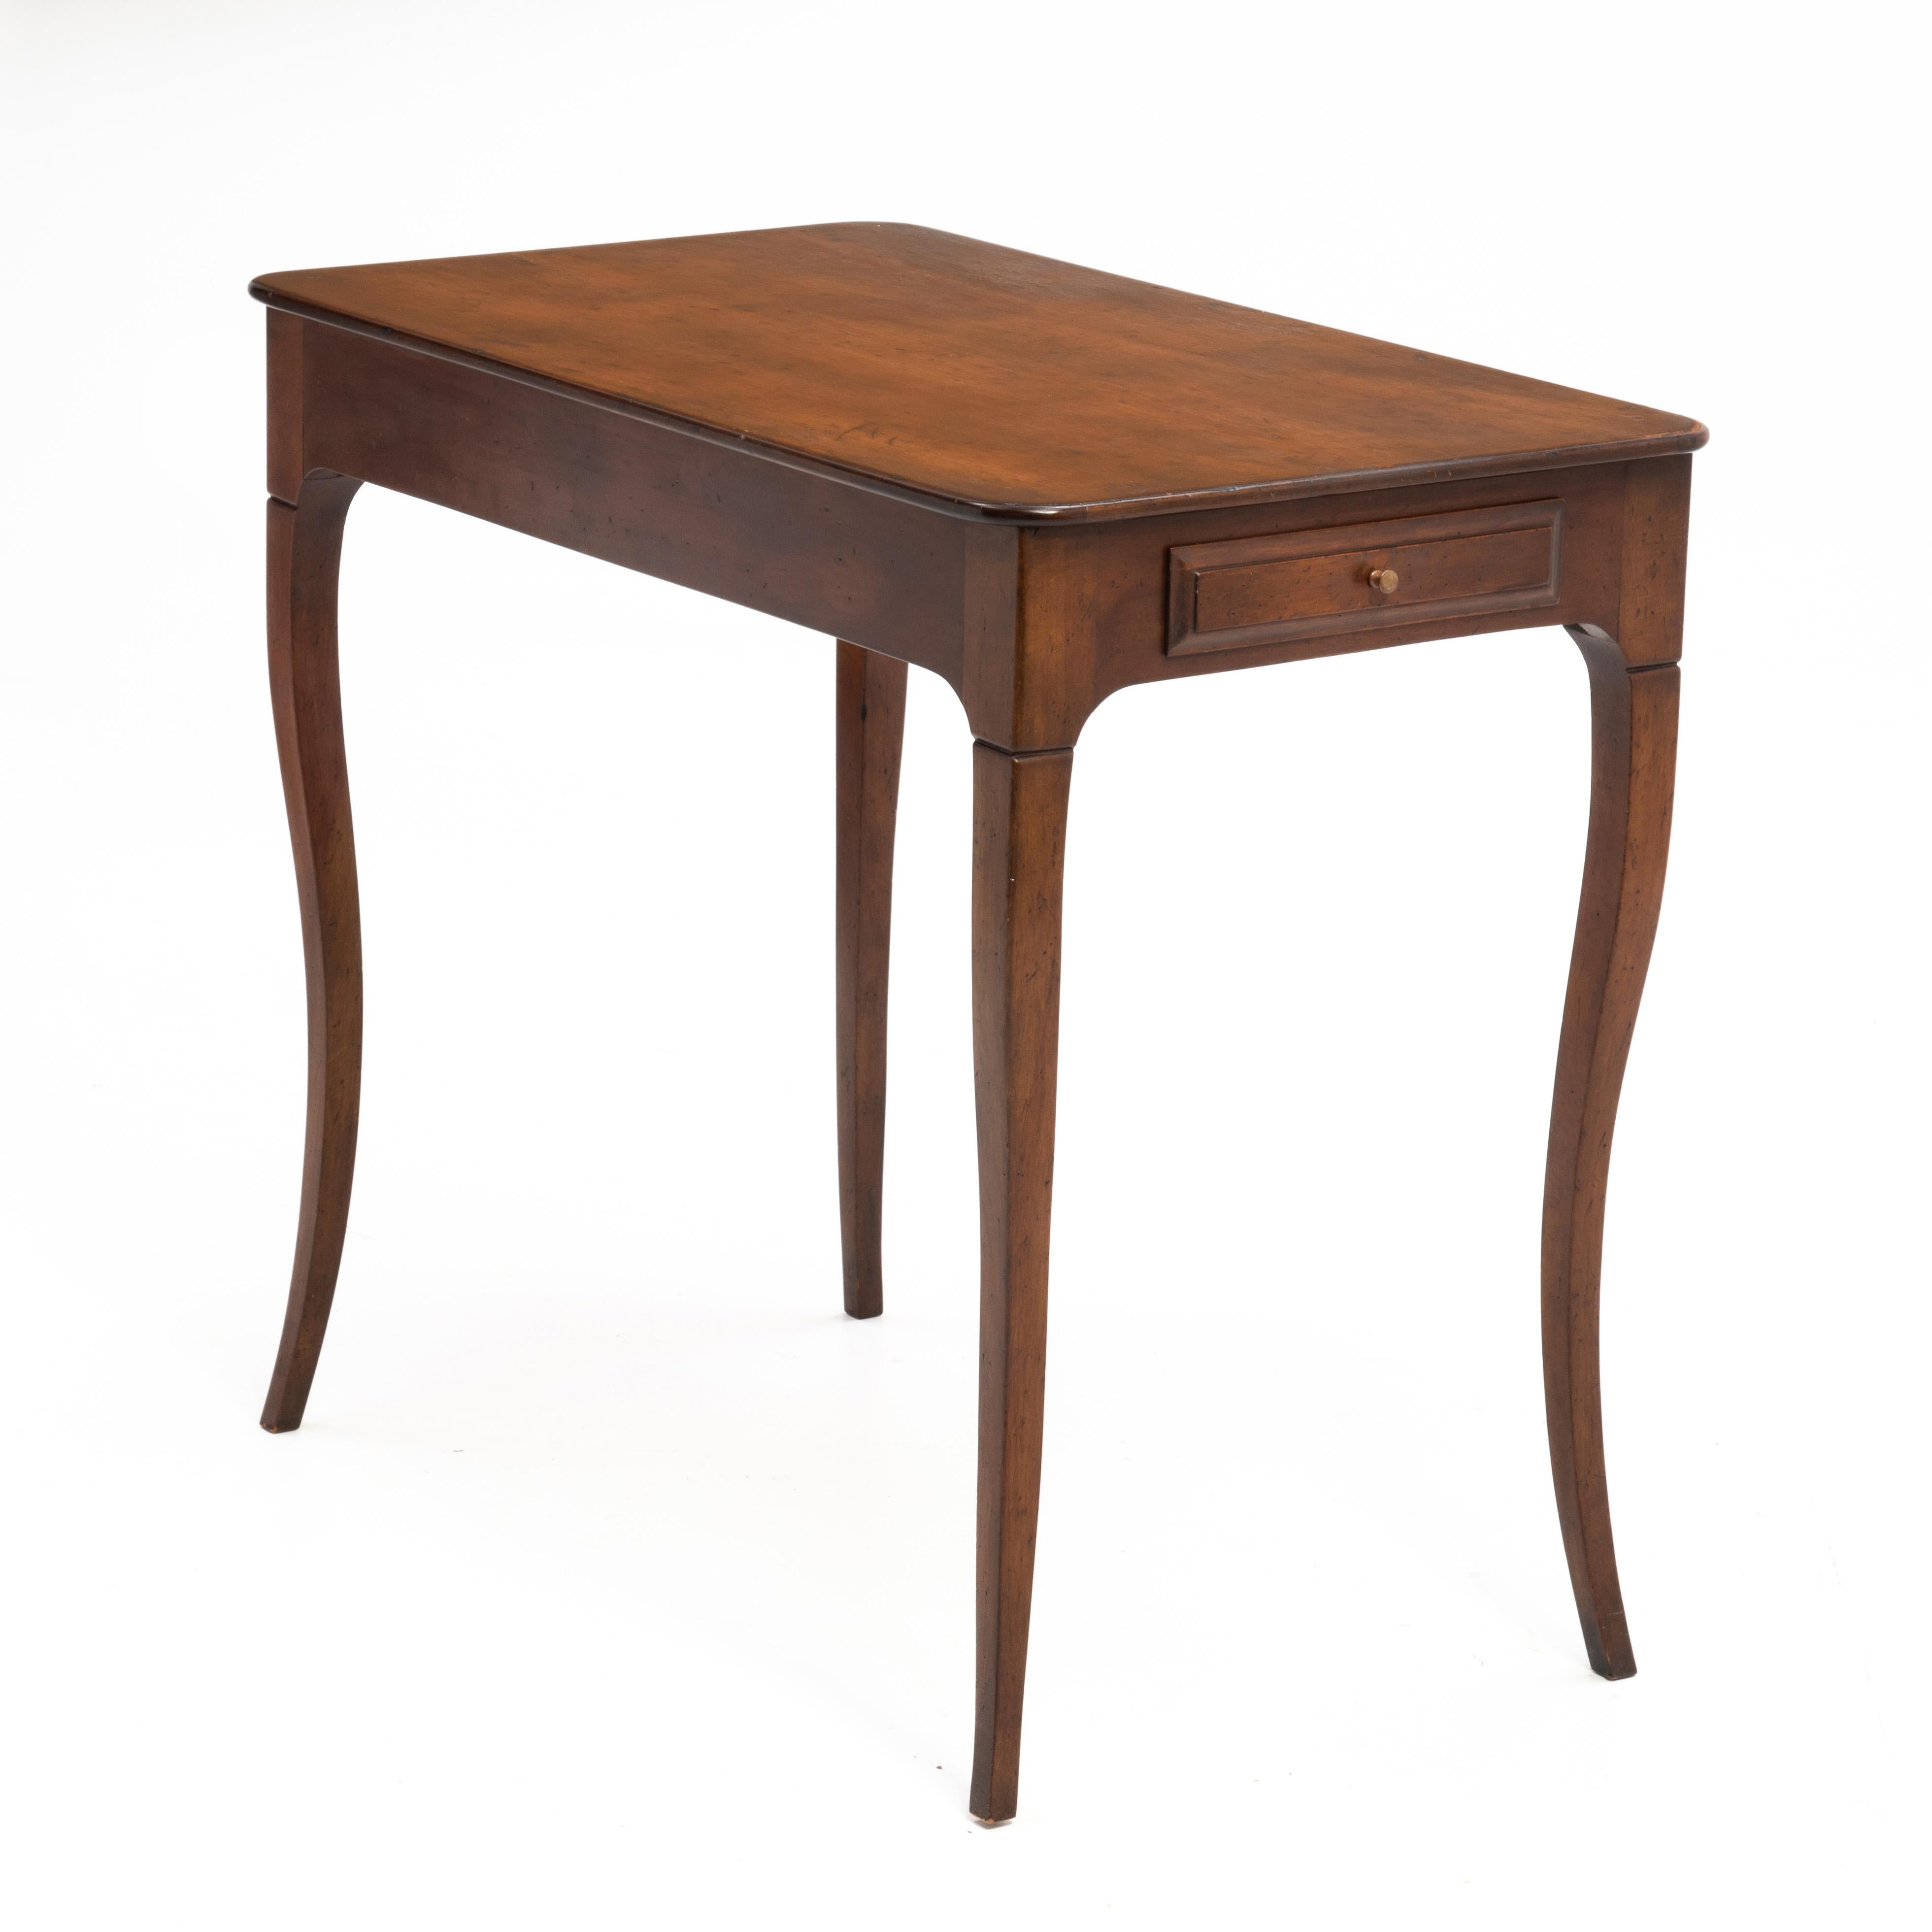 There is some disagreement among us as to where this piece originated. Some say Italy and others France. Either way, it is an elegant and very usable piece. With two drawers, one offset on the front and a second on the side it could serve as a